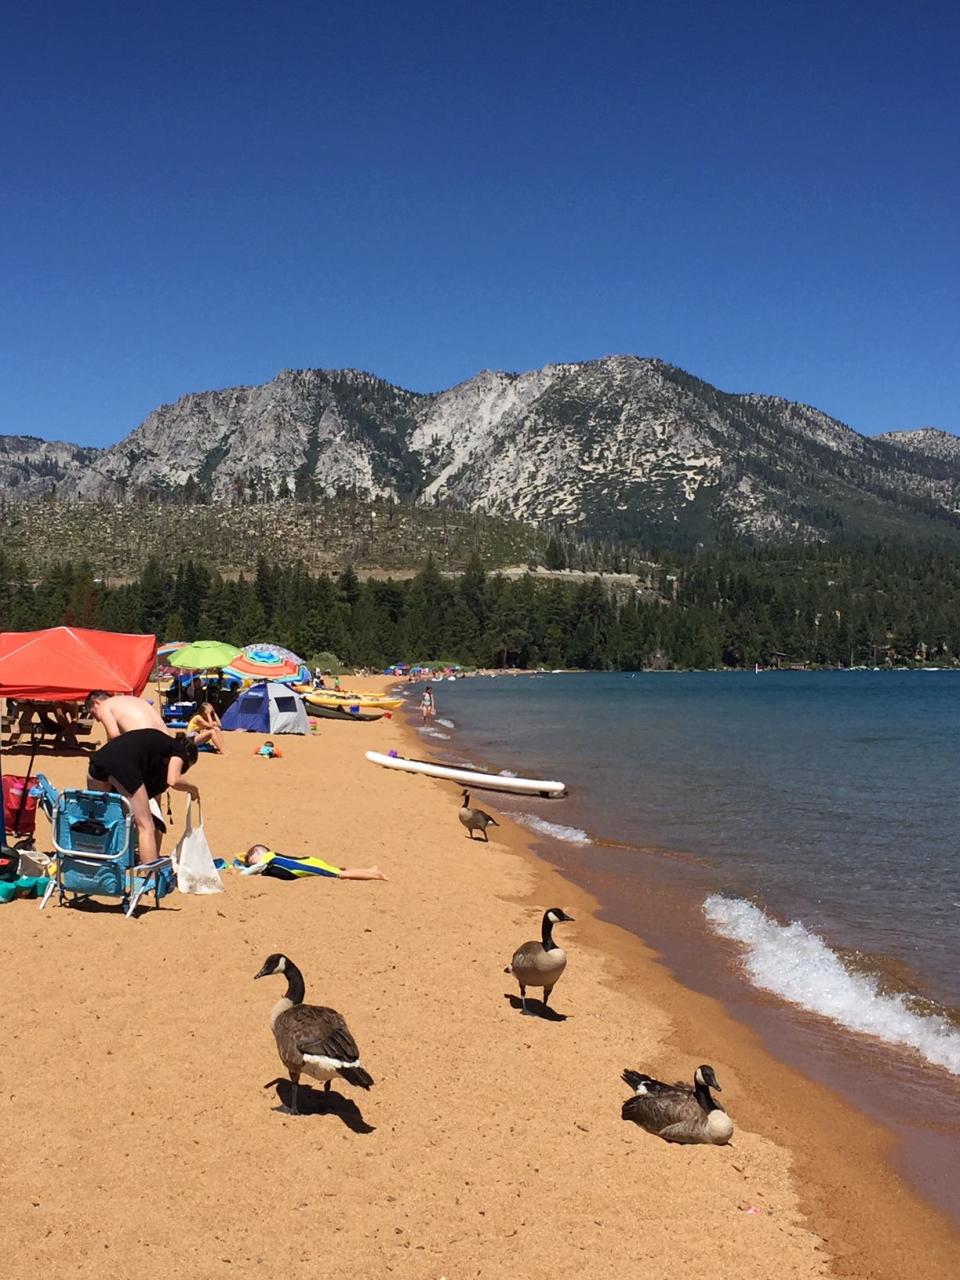 Lake Tahoe’s Baldwin Beach attracts beach-goers, with Mount Tallac in distance.